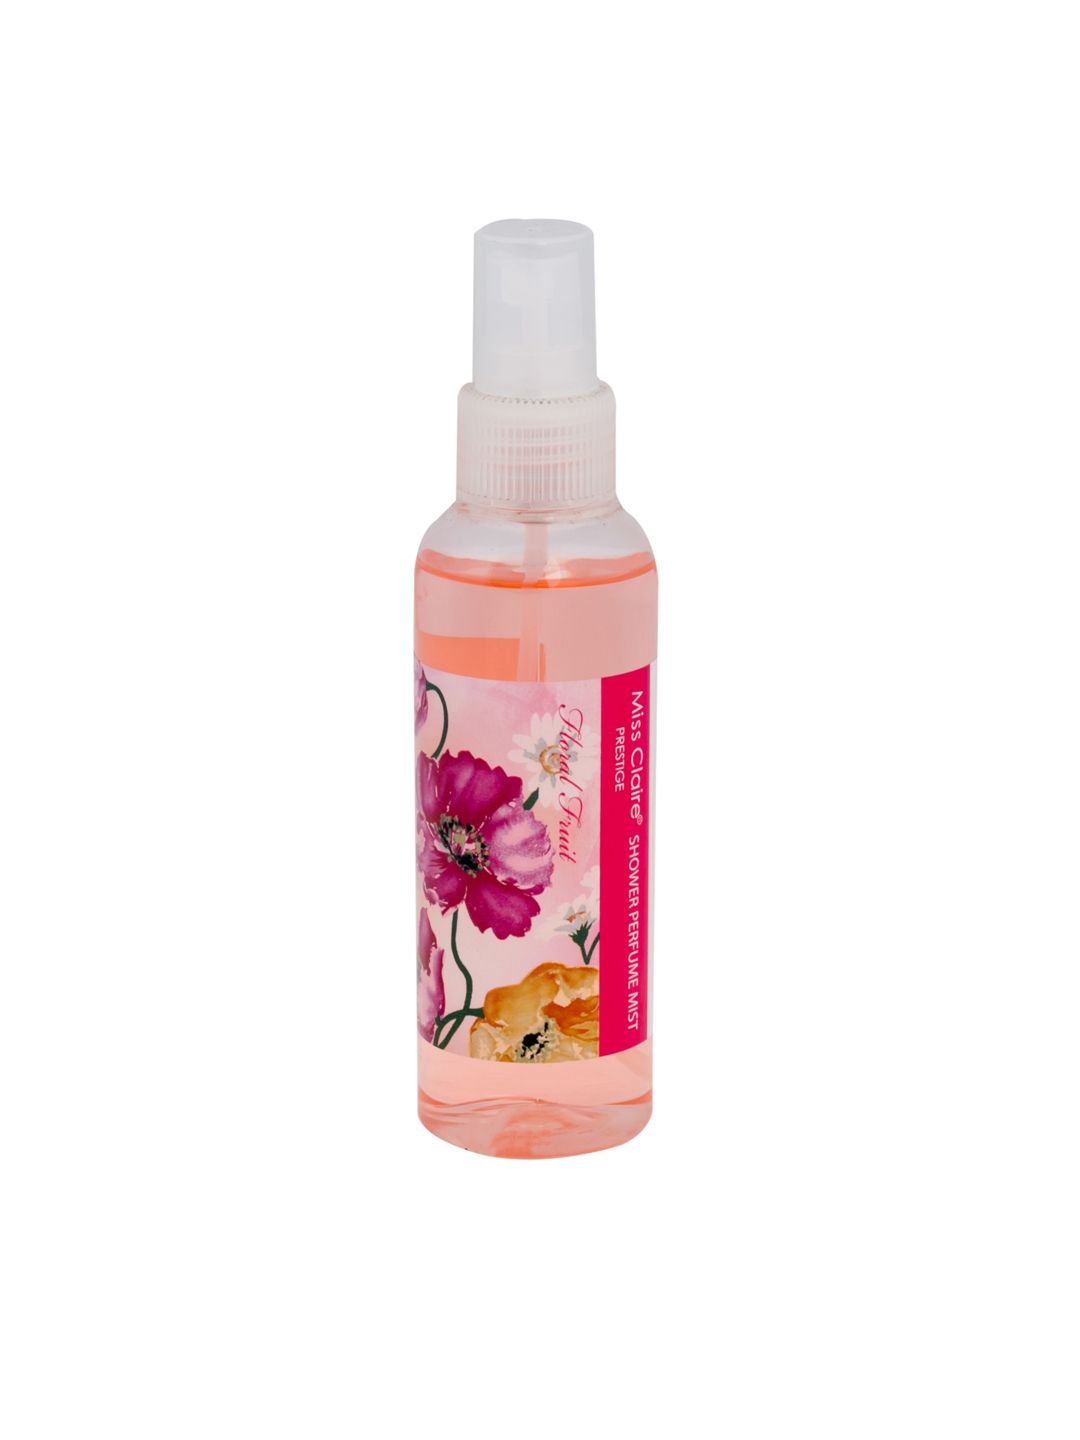 Miss Claire Floral Fruit Shower Perfume Mist 150 ml Price in India